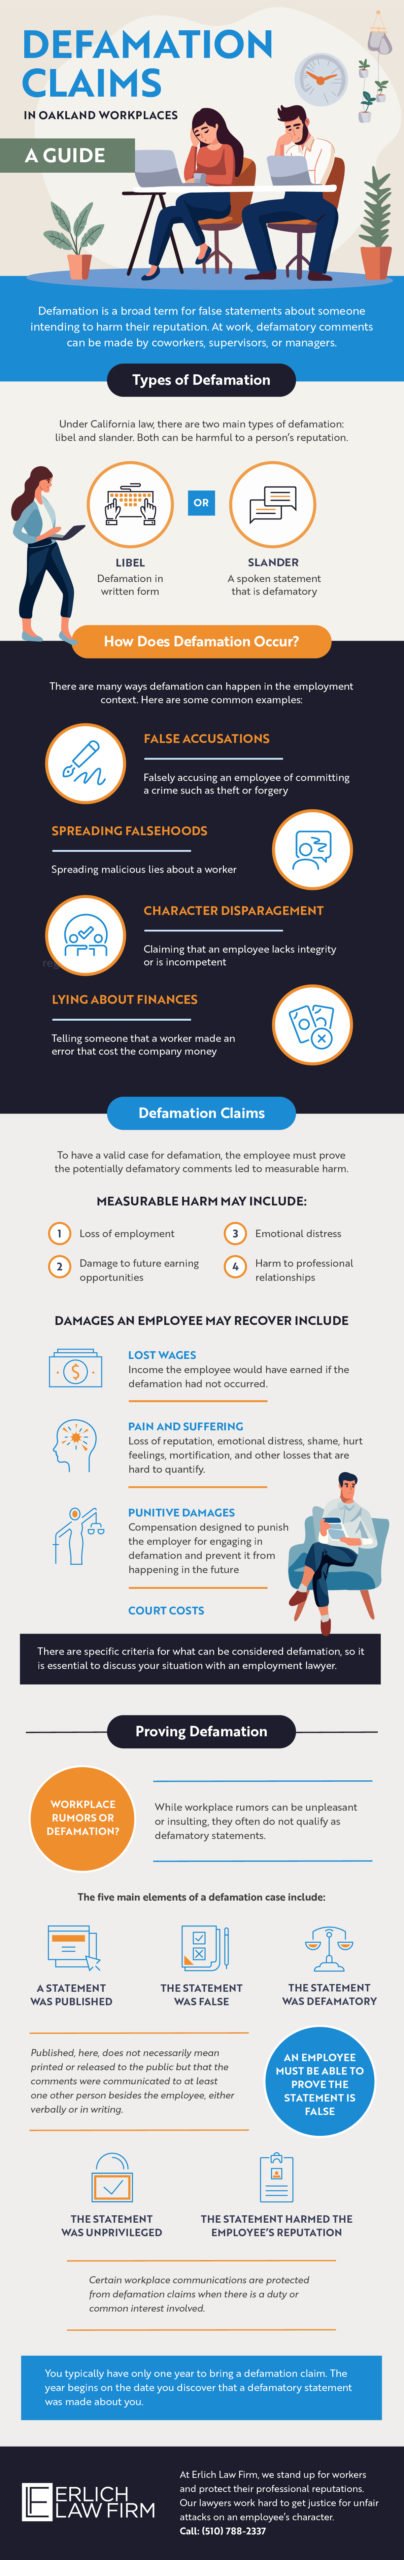 Defamation is a broad term for false statements about someone intending to harm their reputation. At work, defamatory comments can be made by coworkers, supervisors, or managers.